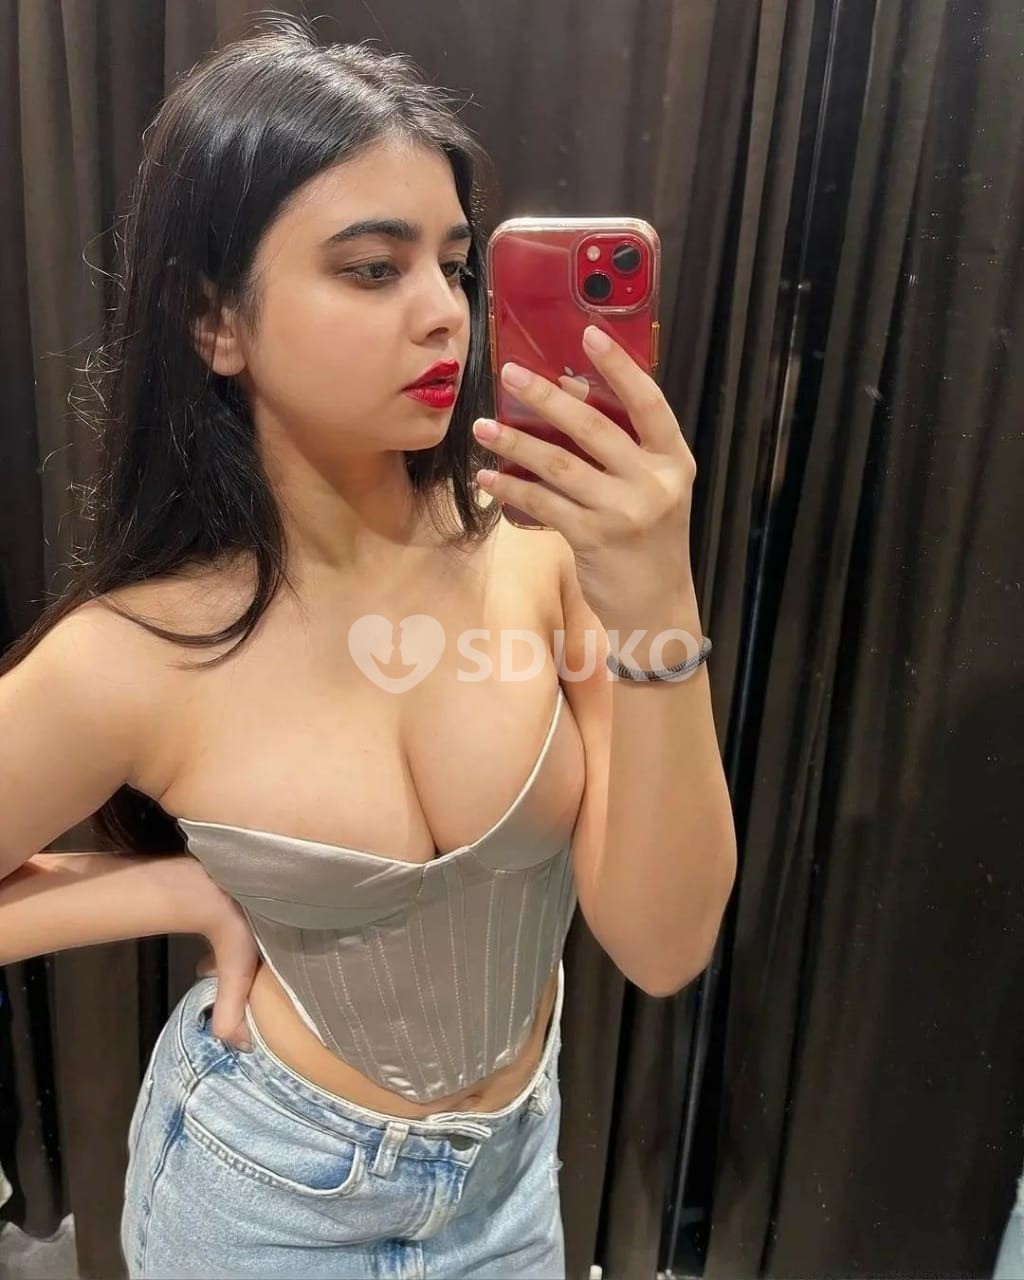 HAYATHNAGAR VIP TODAY 🔅 🌜 PRICE ESCORT 🥰SERVICE 100% SAFE AND SECURE ANYTIME CALL ME 24 X 7 SERVICE AVAILABLE 1